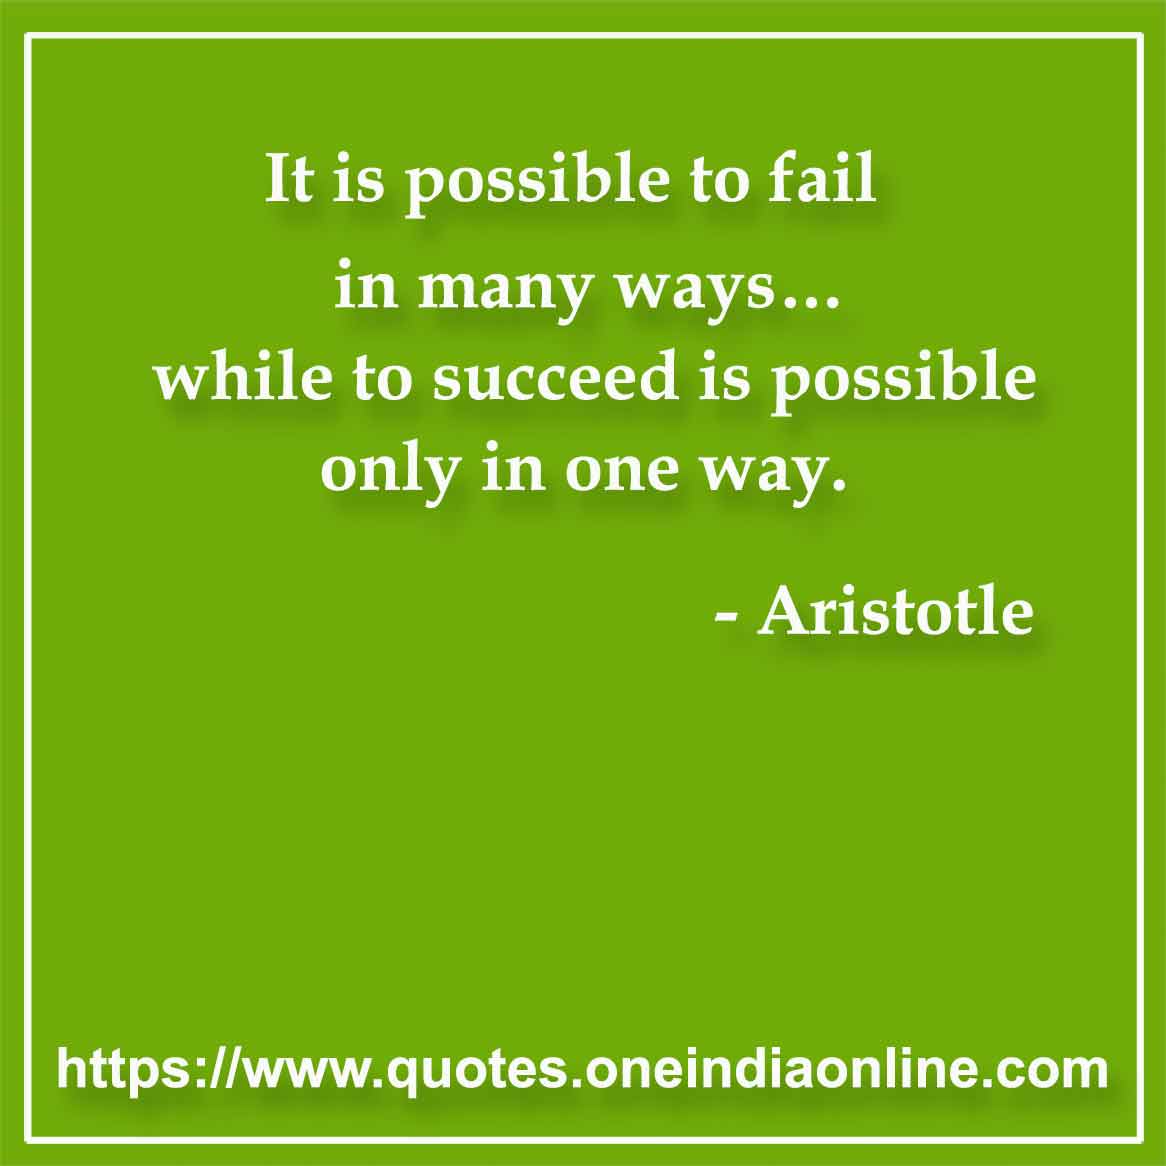 It is possible to fail in many ways… while to succeed is possible only in one way.

- Failure Quotes by Aristotle